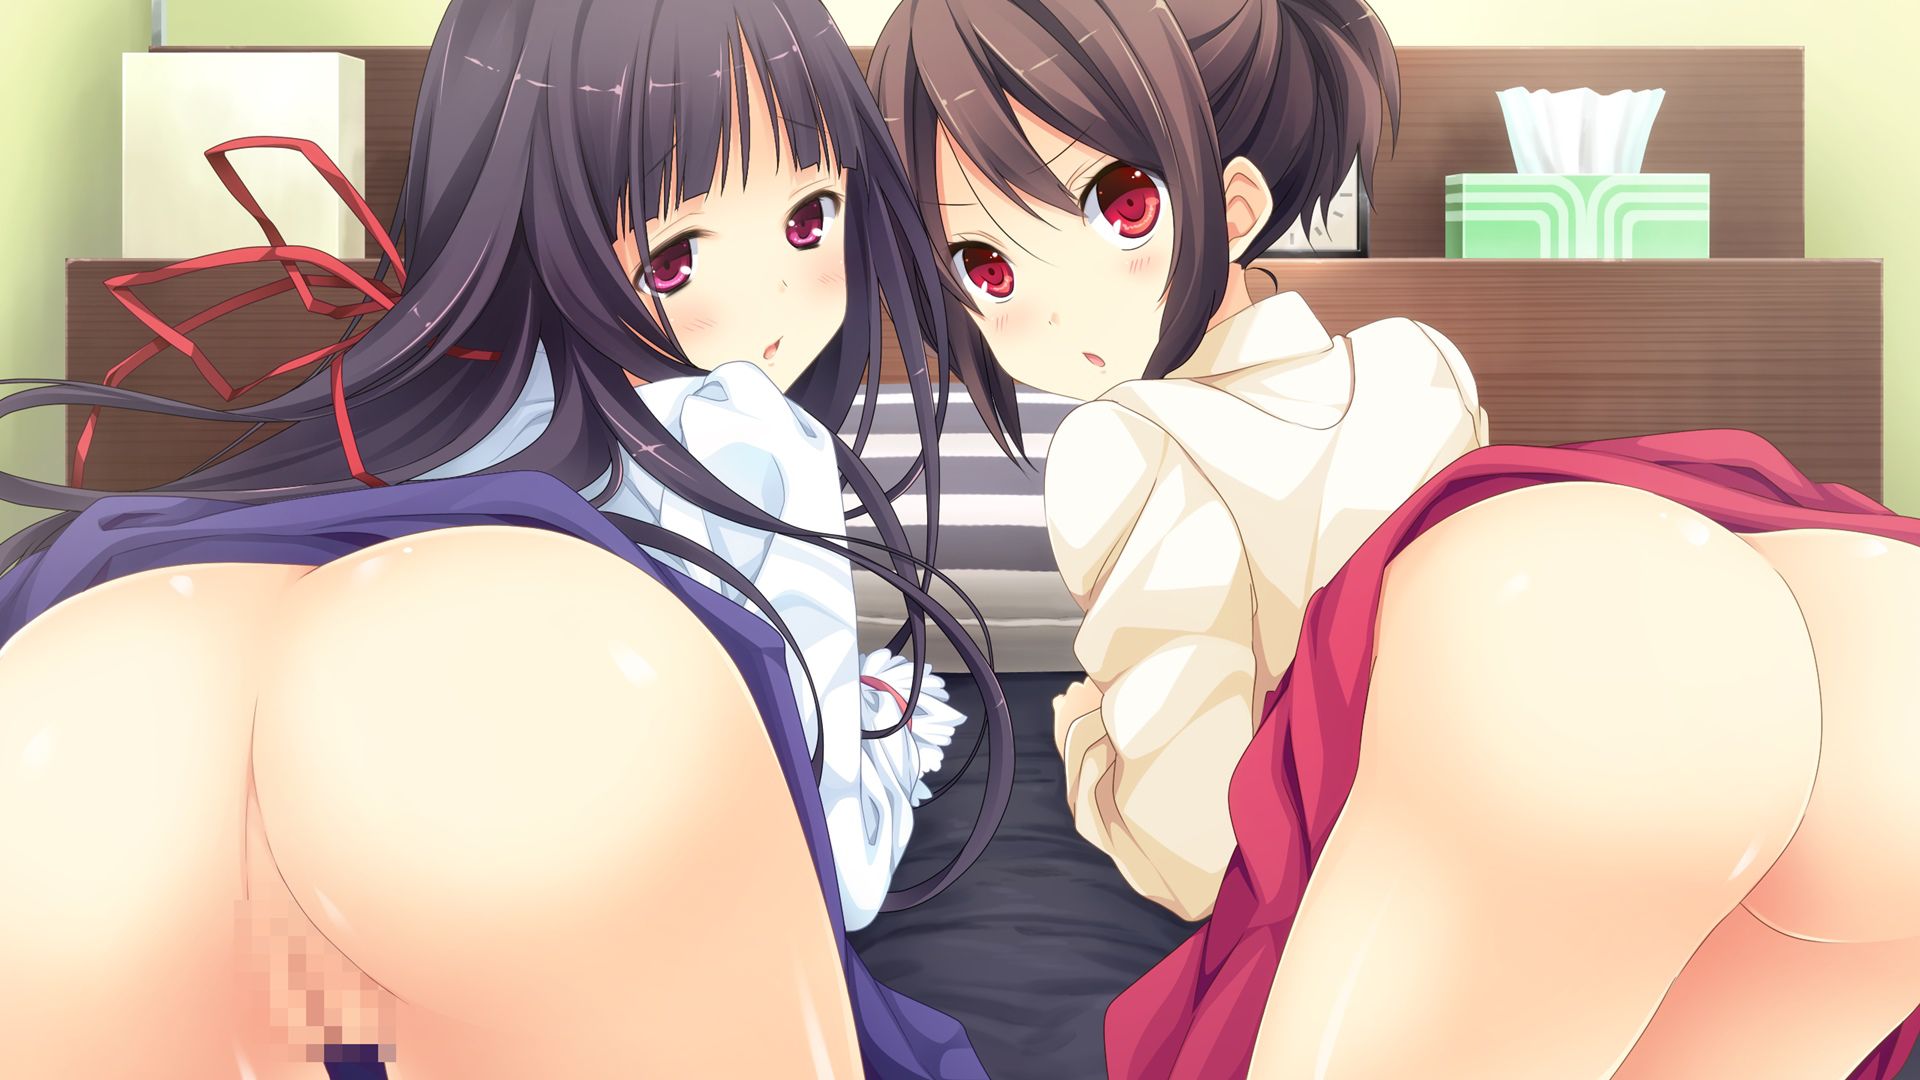 And me and her lover. [Under age 18 prohibited eroge CG] picture part 2 13